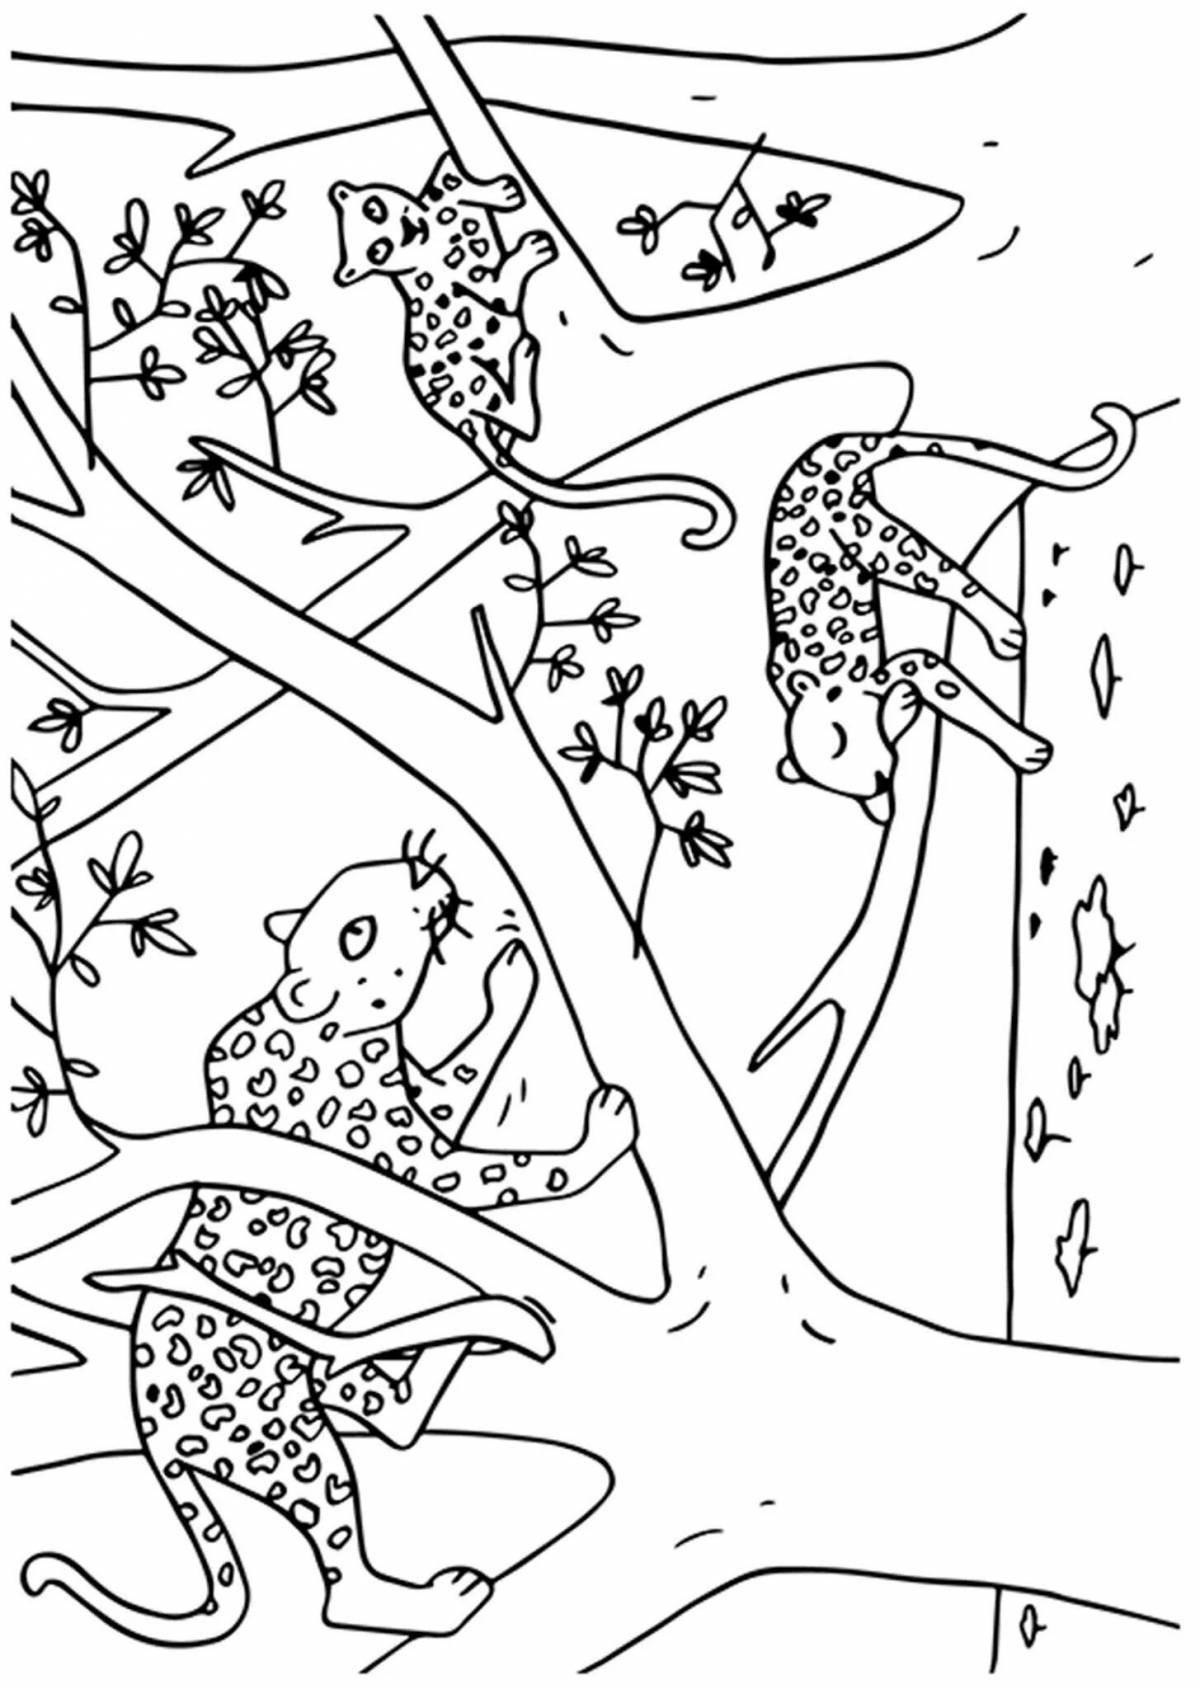 Blissful mindfulness coloring pages